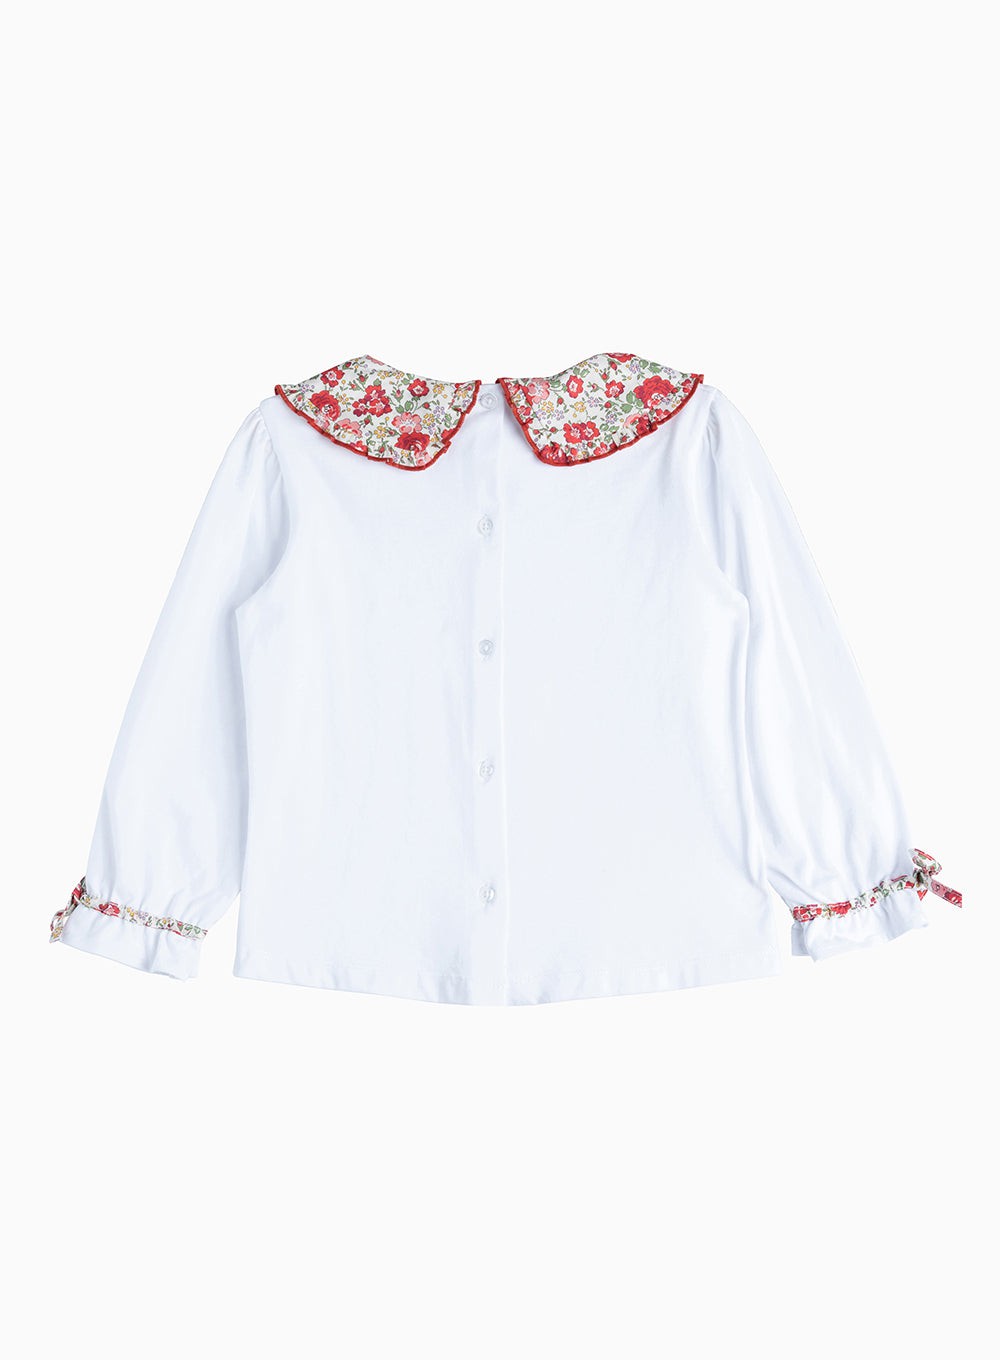 Lily Rose Top Felicite Pie Crust Jersey Blouse